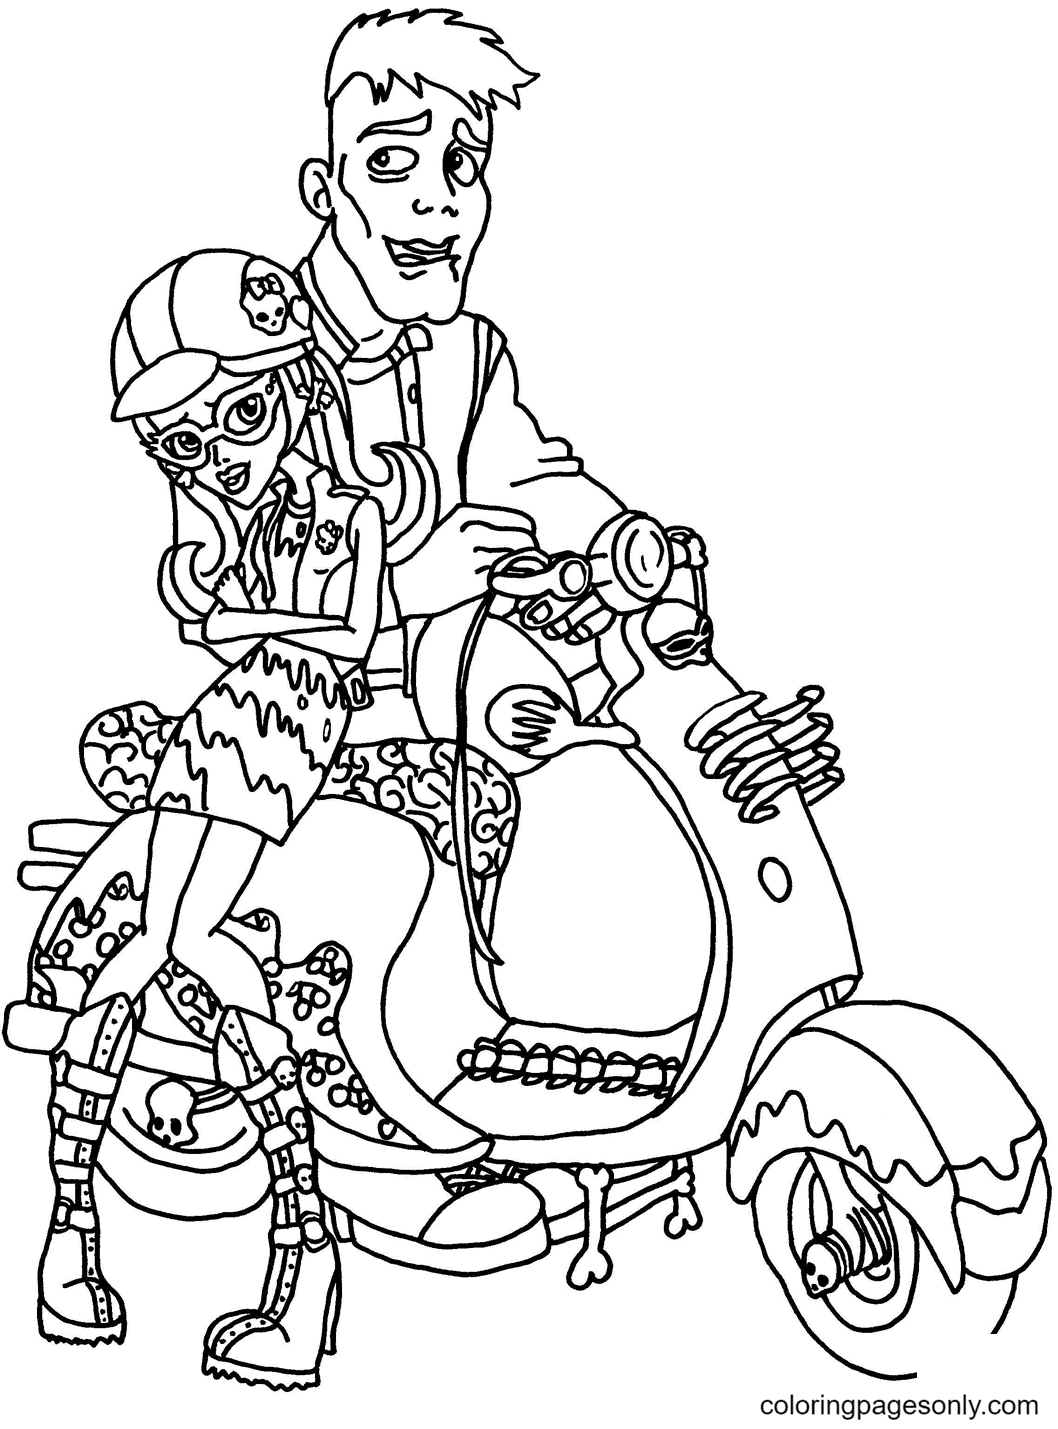 Ghoulia and Slow Moe Coloring Pages